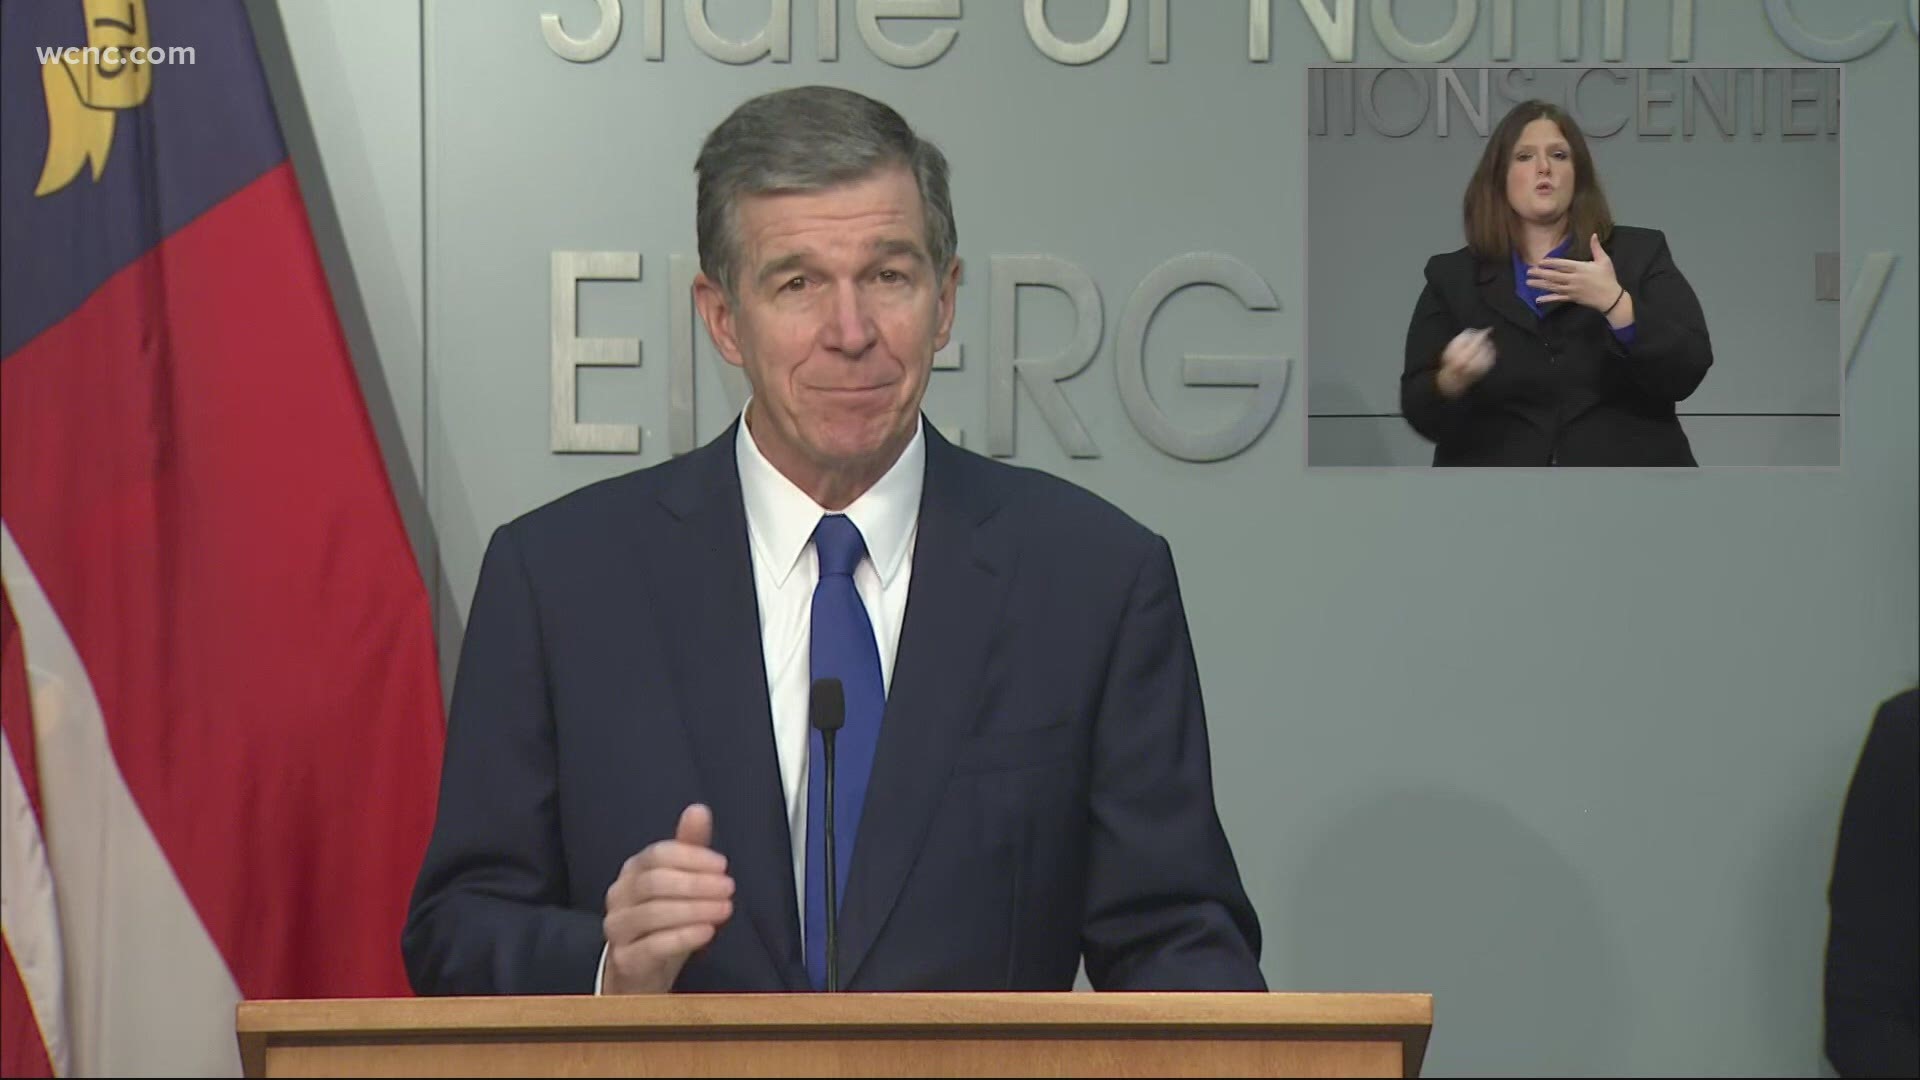 Governor Cooper announced that these changes could happen as soon as October 5th.